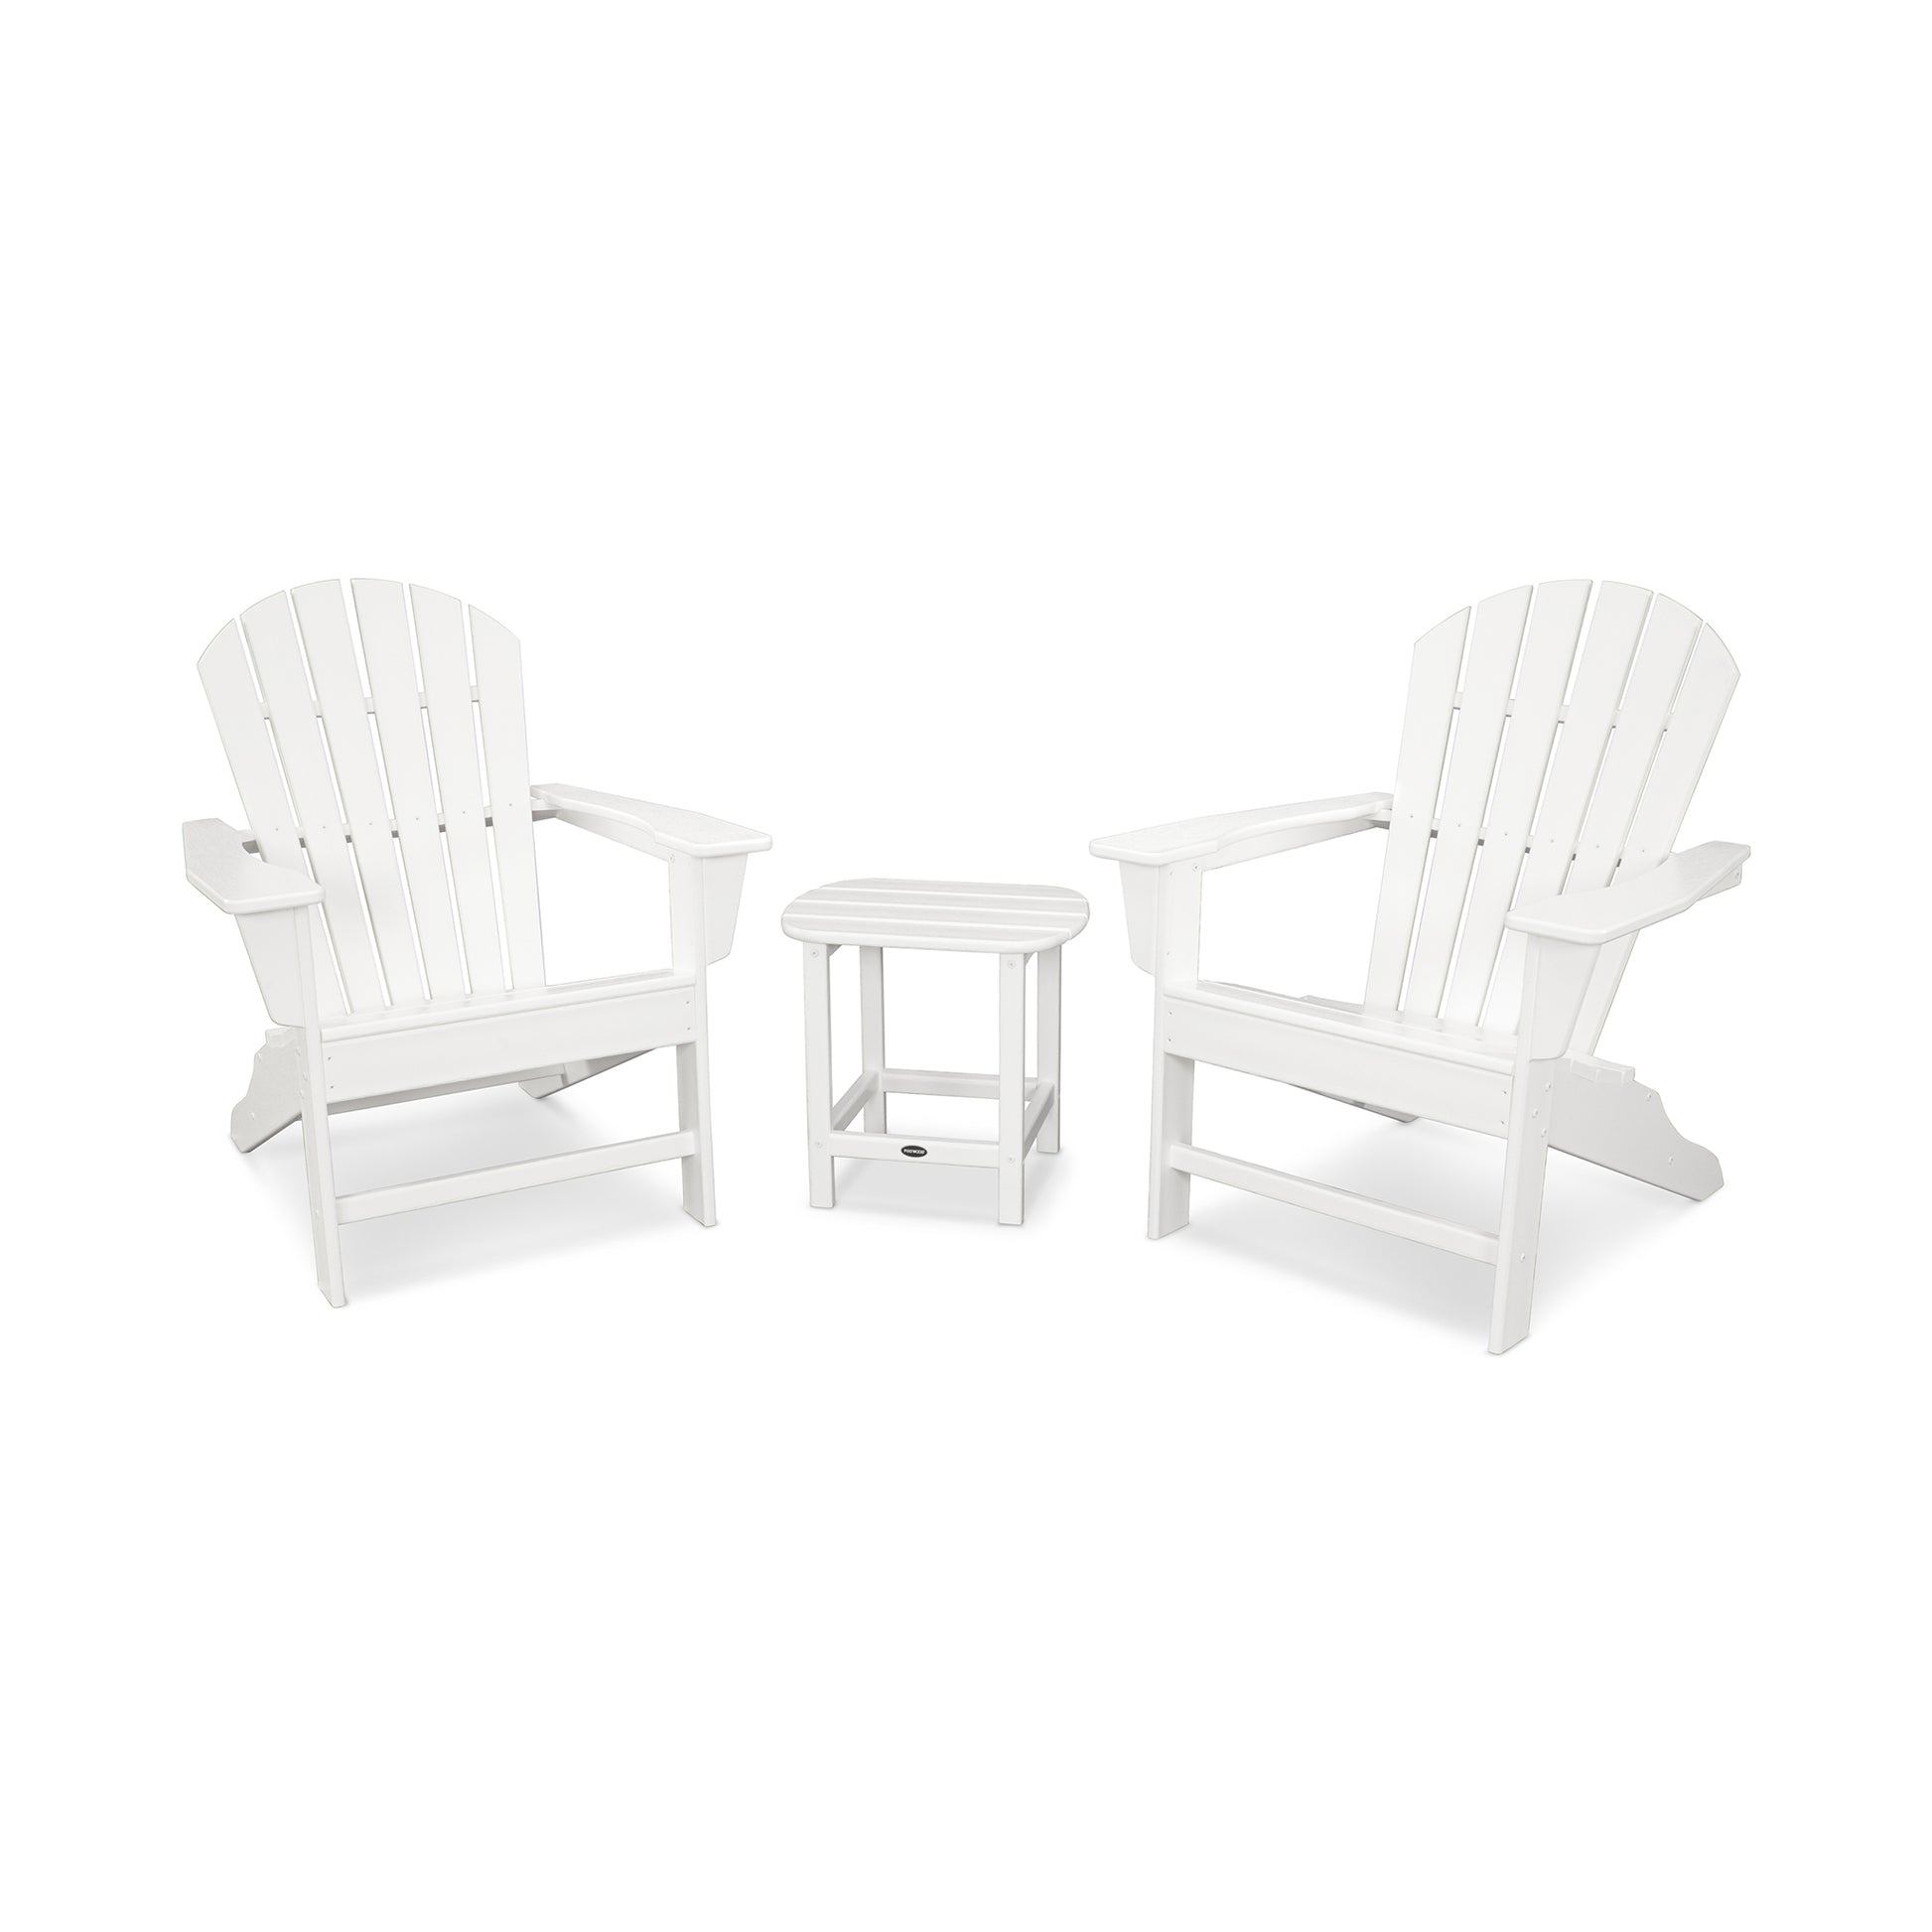 Two white POLYWOOD South Beach Adirondack chairs with a small matching table between them, set against a white background.